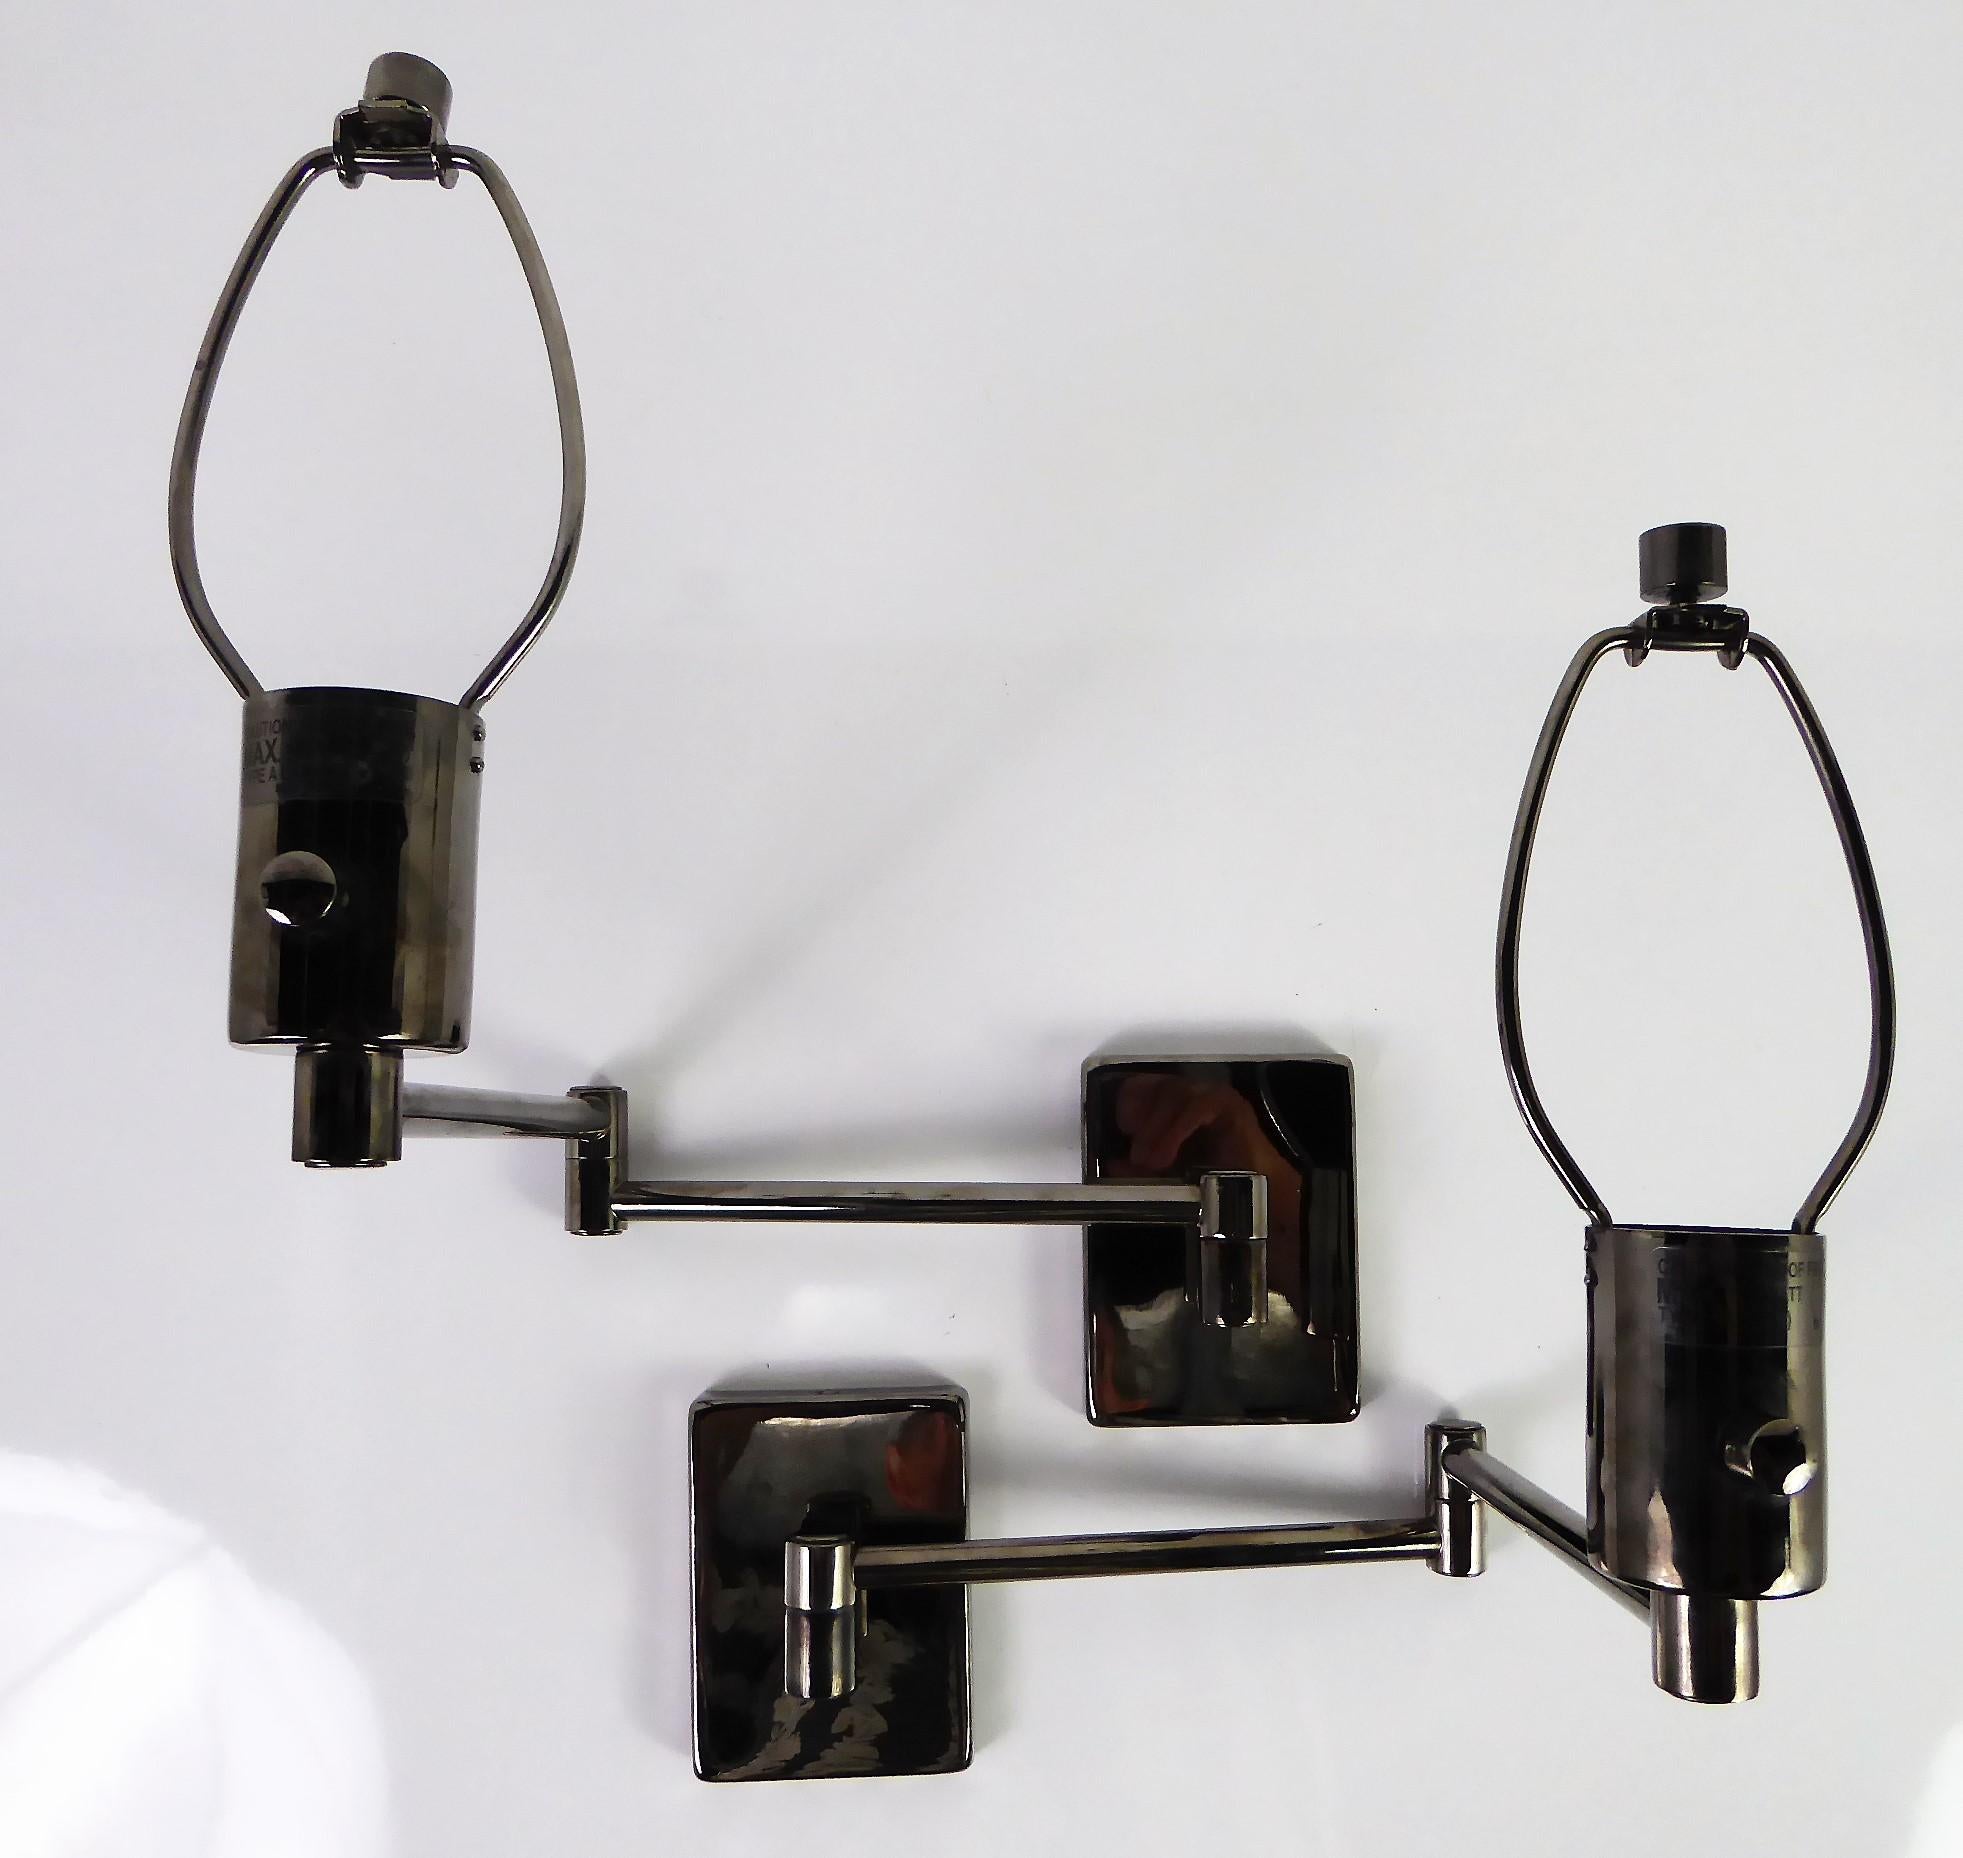 Elegant pair of classic George Hansen designed swing arm wall lights in bright gunmetal finish with a dimmer switch. Made by MetalArte in Spain for Hinson Lamps, now a subsidiary of Donghia. This pair of wall lamps come with their original Black